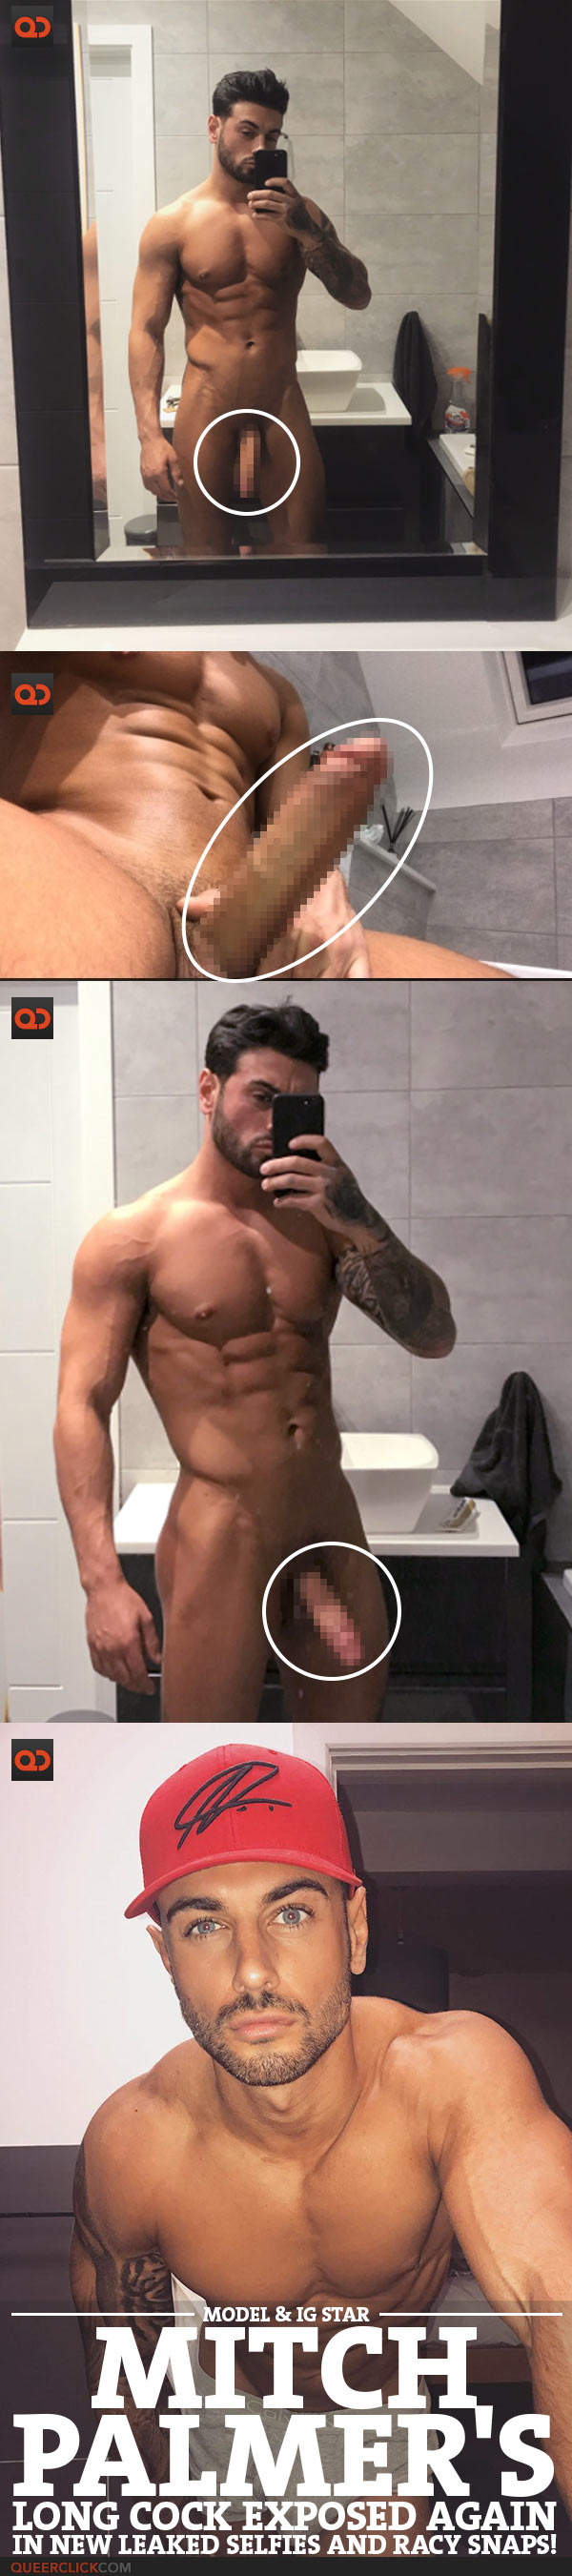 Mitch Palmer's Long Cock Exposed Again In New Leaked Selfies And Racy Snaps!